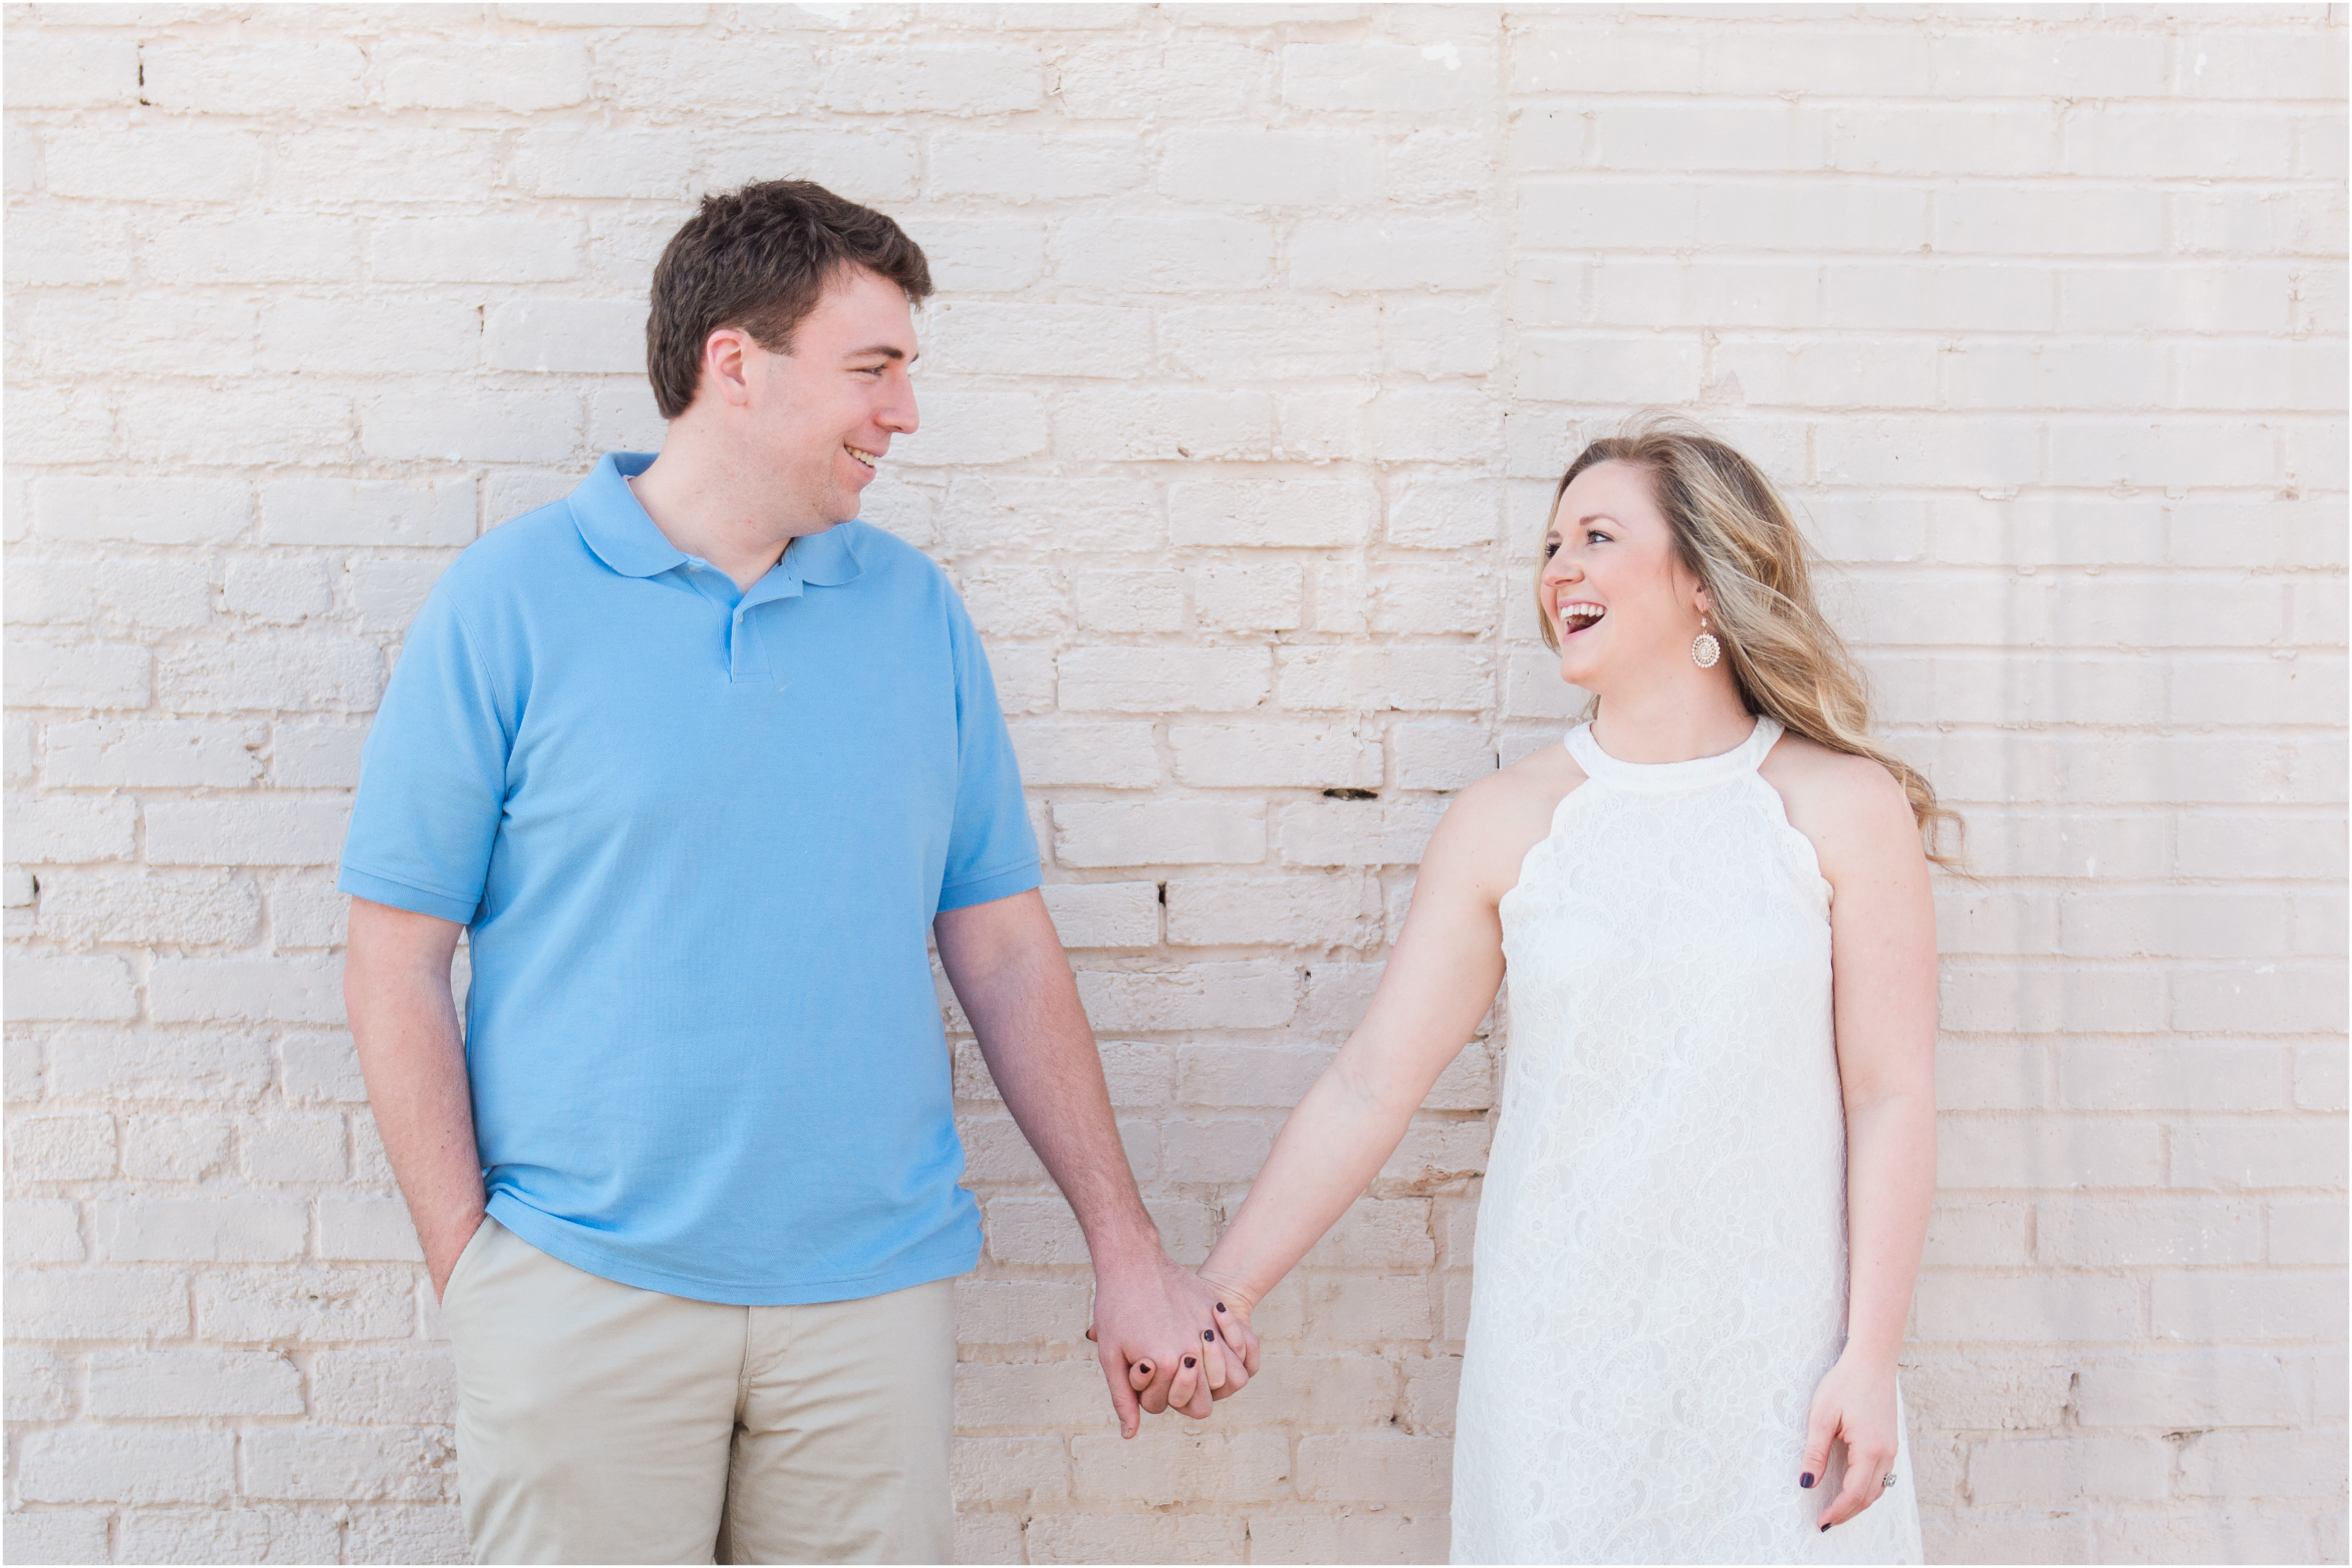 Downtown inspired engagement photography in Woodruff, SC.